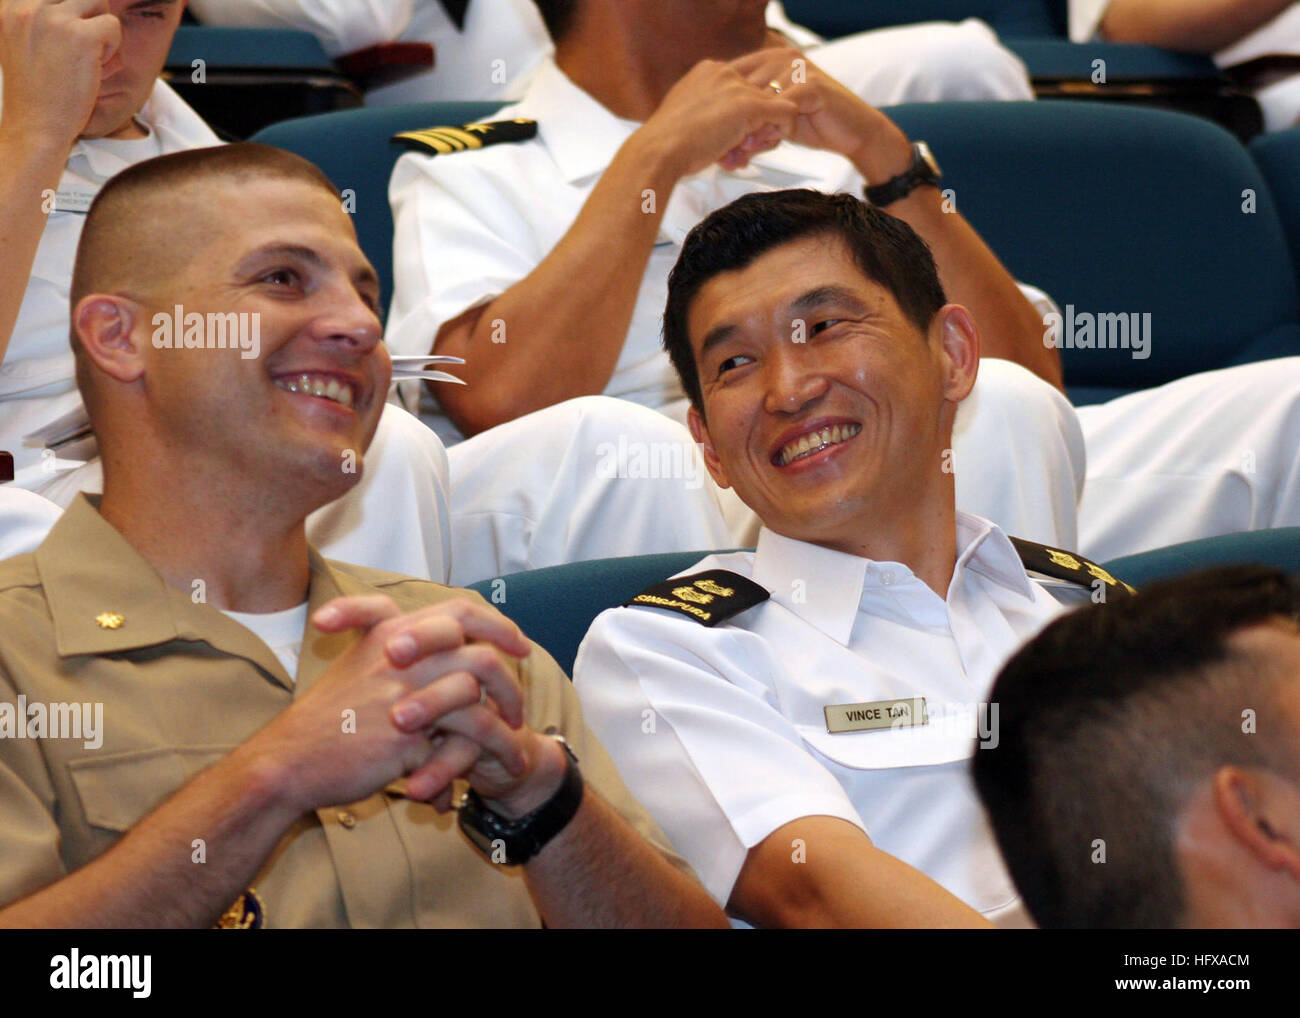 090608-N-8467B-027 SINGAPORE (June 8, 2009) Maj. Derek Snell, landing force officer-in-charge for Cooperation Afloat Readiness and Training (CARAT) 2009, visits with Lt. Col. Vince Tan, executive officer of the Republic of Singapore Navy frigate RSS Intrepid, before the opening ceremony for the Singapore phase of CARAT at Changi Naval Base. CARAT is a series of bilateral exercises held annually in Southeast Asia to strengthen relationships and enhance the operational readiness of the participating forces. (U.S. Navy photo by Mass Communications Specialist 2nd Class Ernesto Bonilla/Released) US Stock Photo